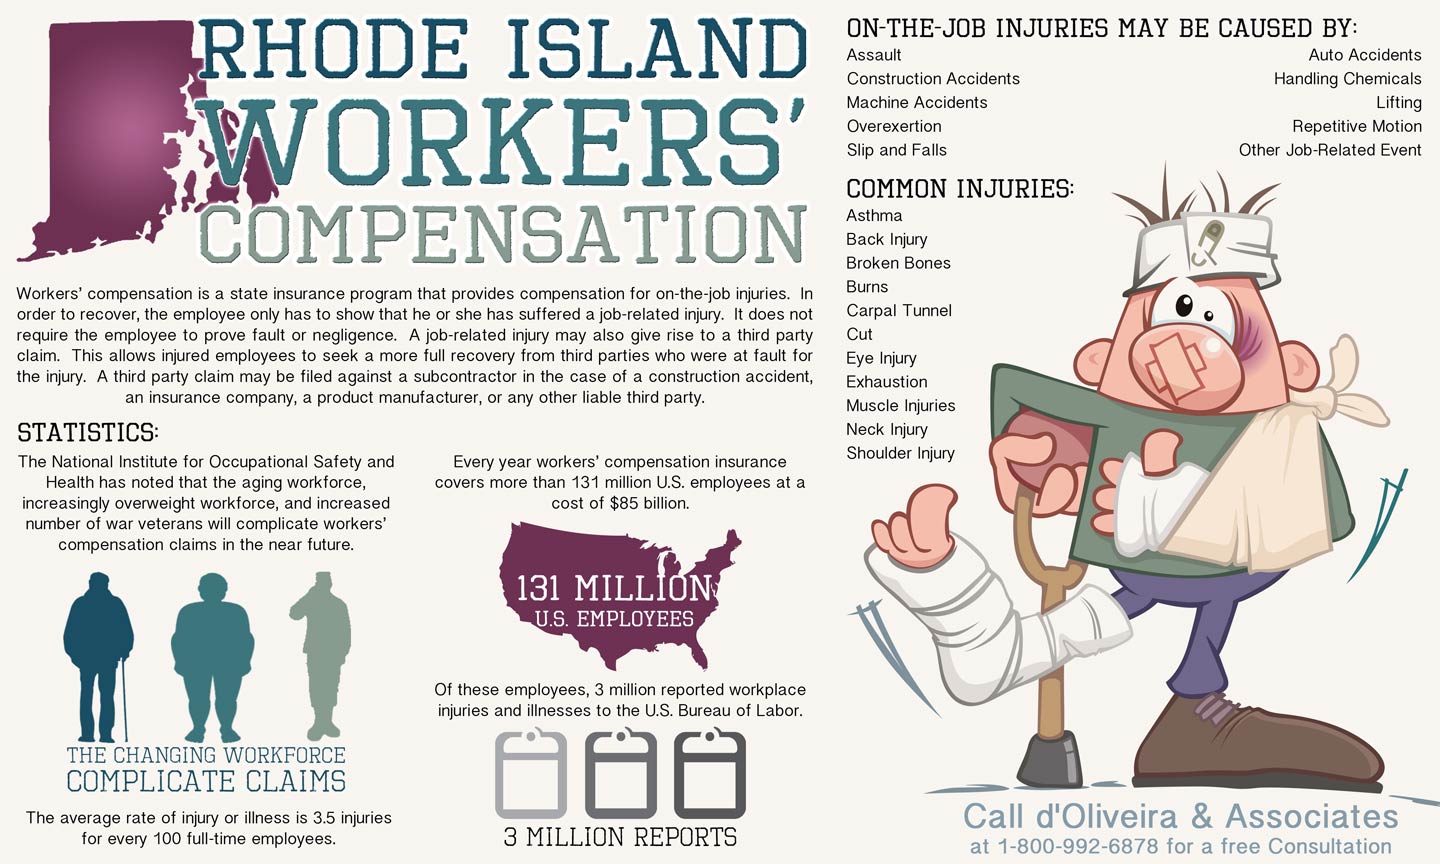 Rhode Island Workers' Compensation Infographic